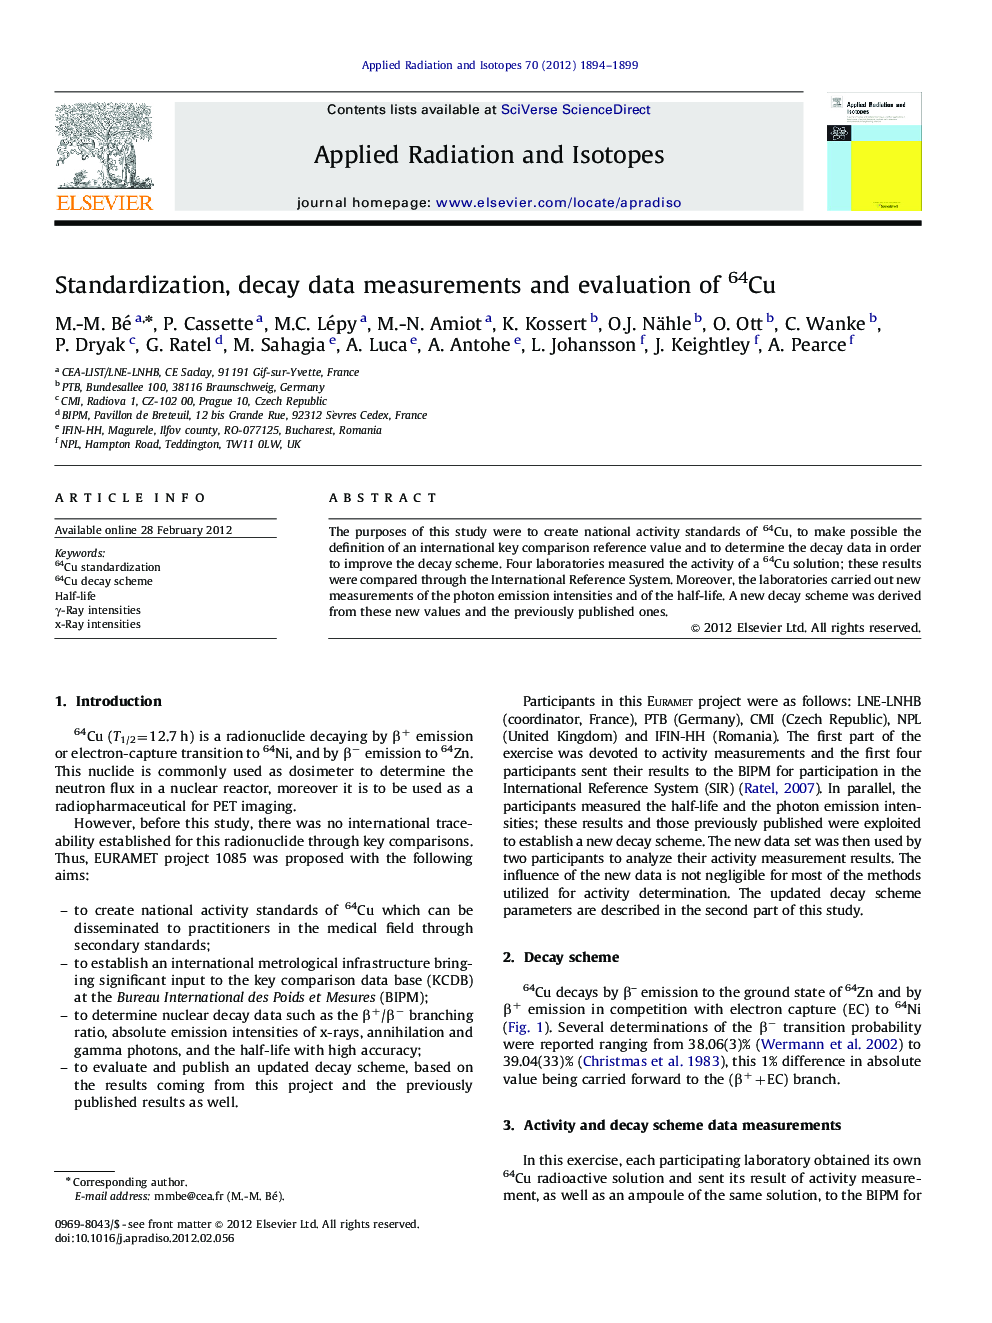 Standardization, decay data measurements and evaluation of 64Cu